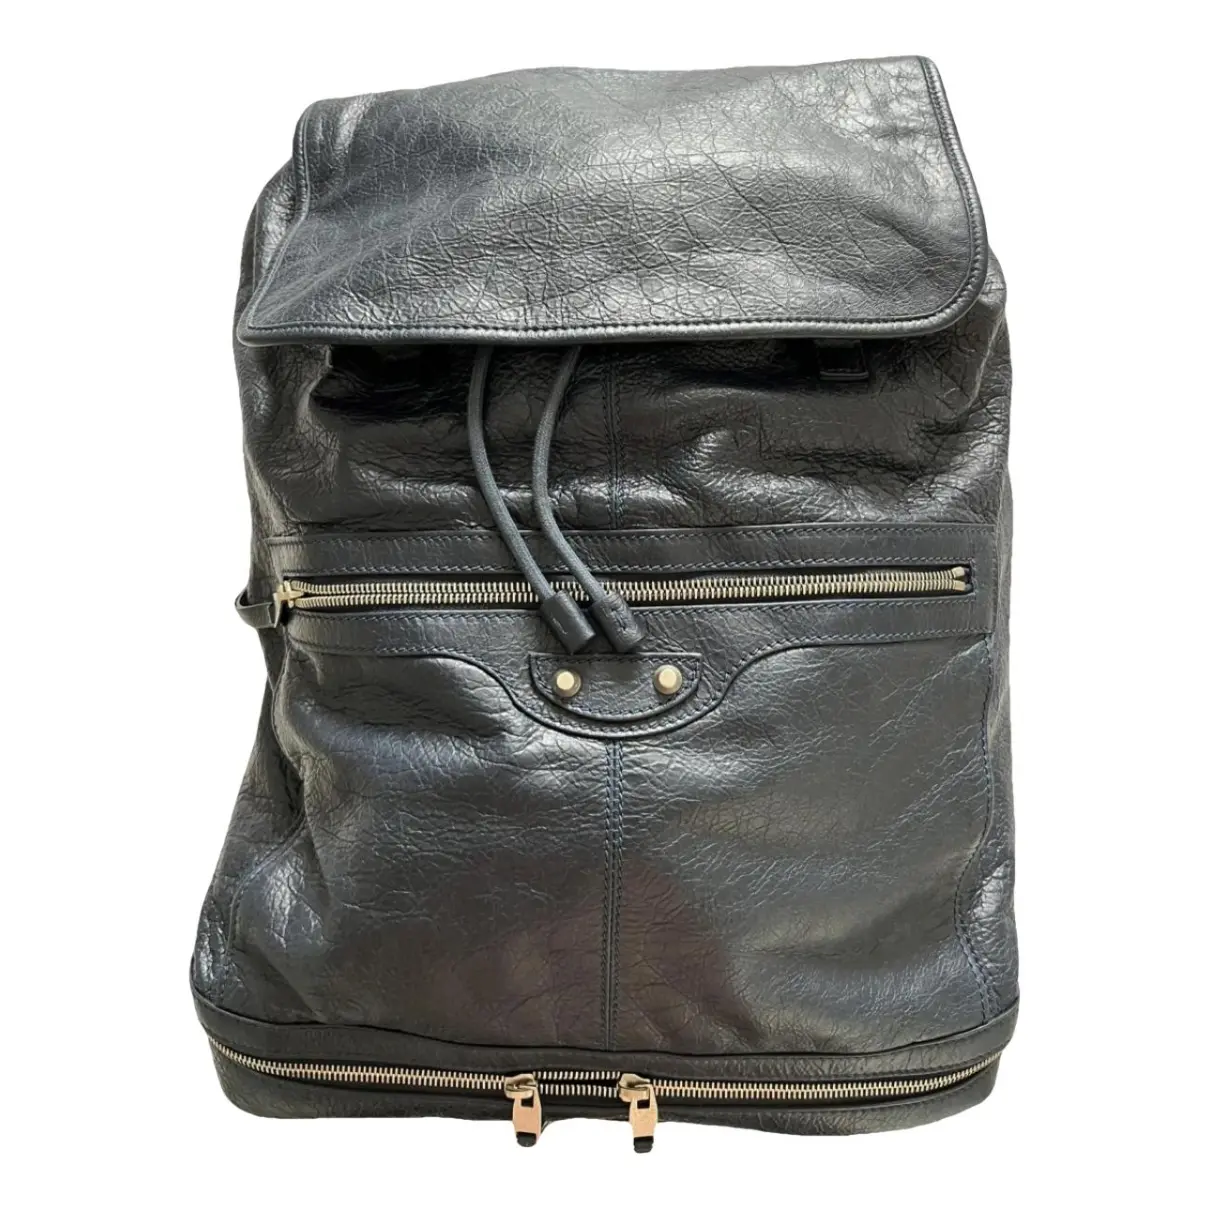 Patent leather backpack Balenciaga